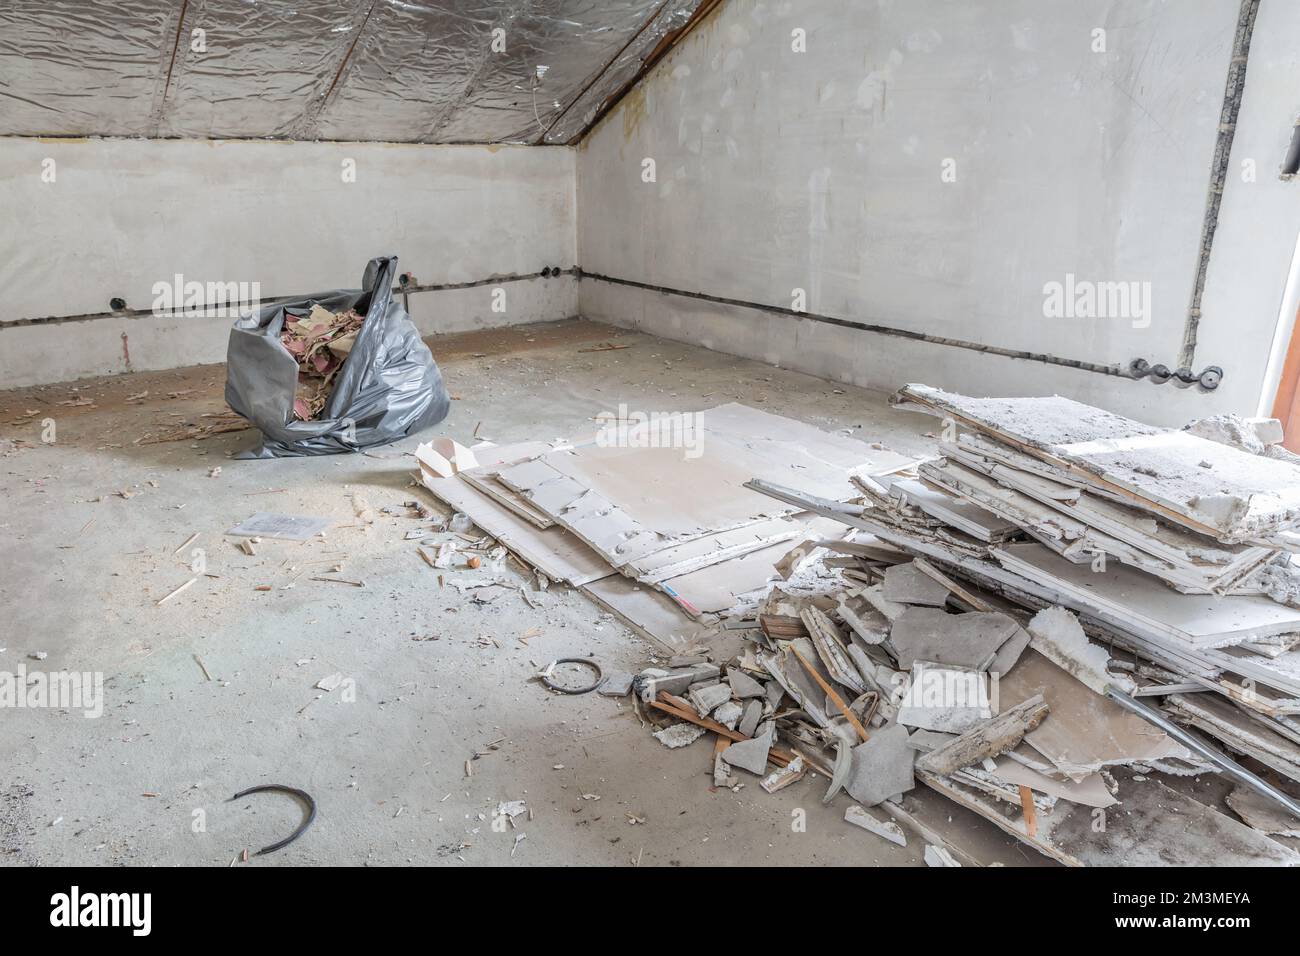 Renovation of old house, room under construction with rubble, old ceiling Stock Photo